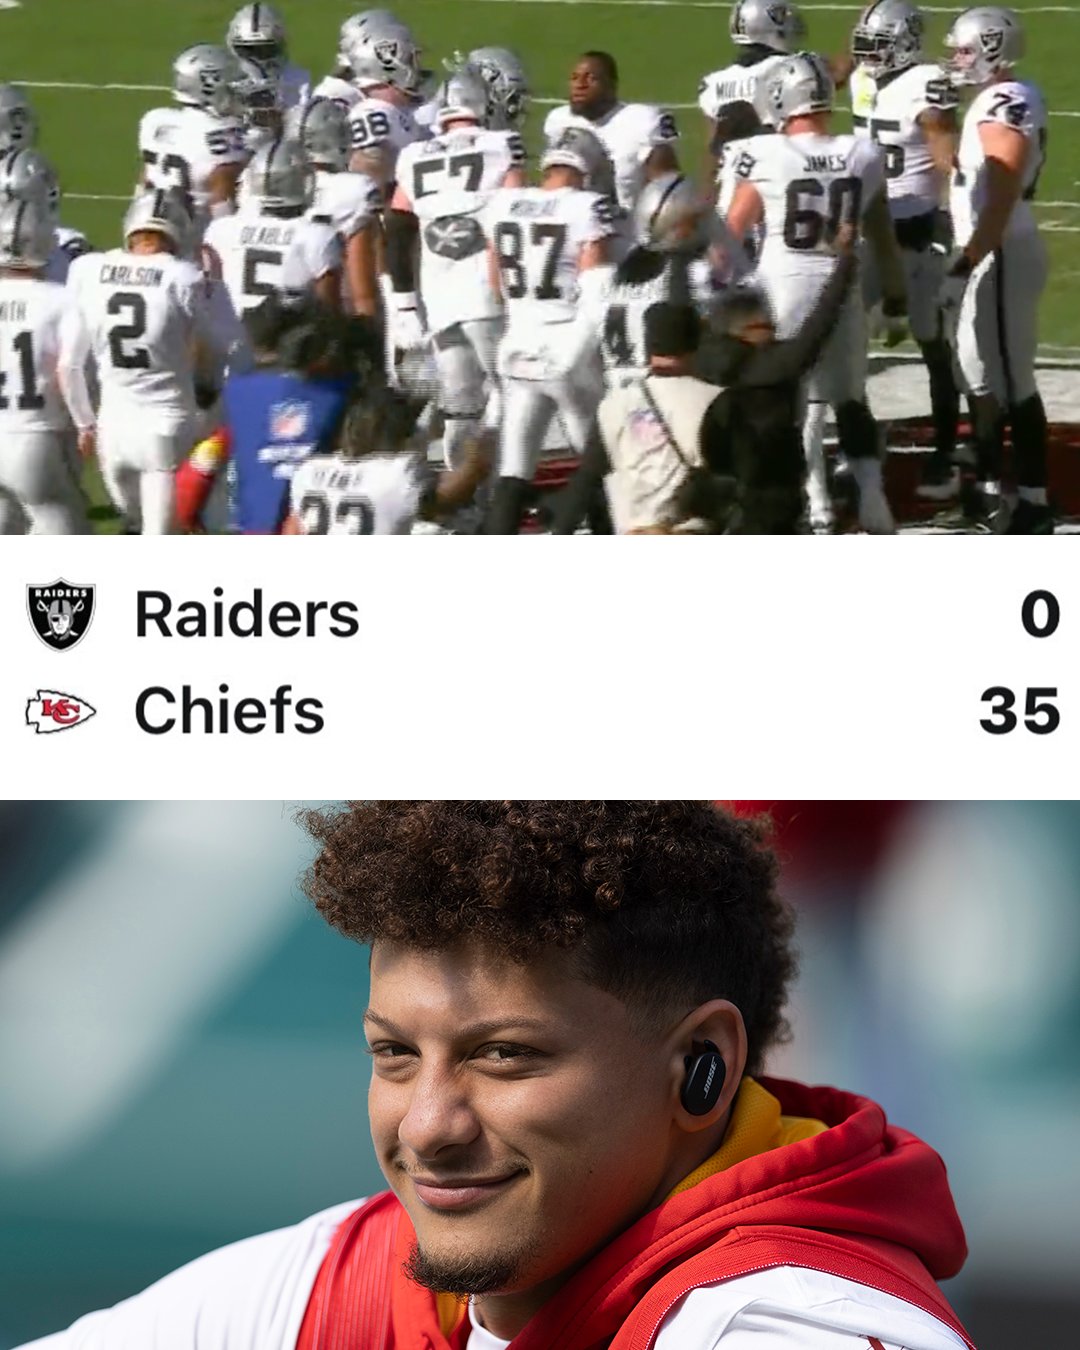 Raiders Roasted for Pregame Meeting on Chiefs Logo [LOOK]